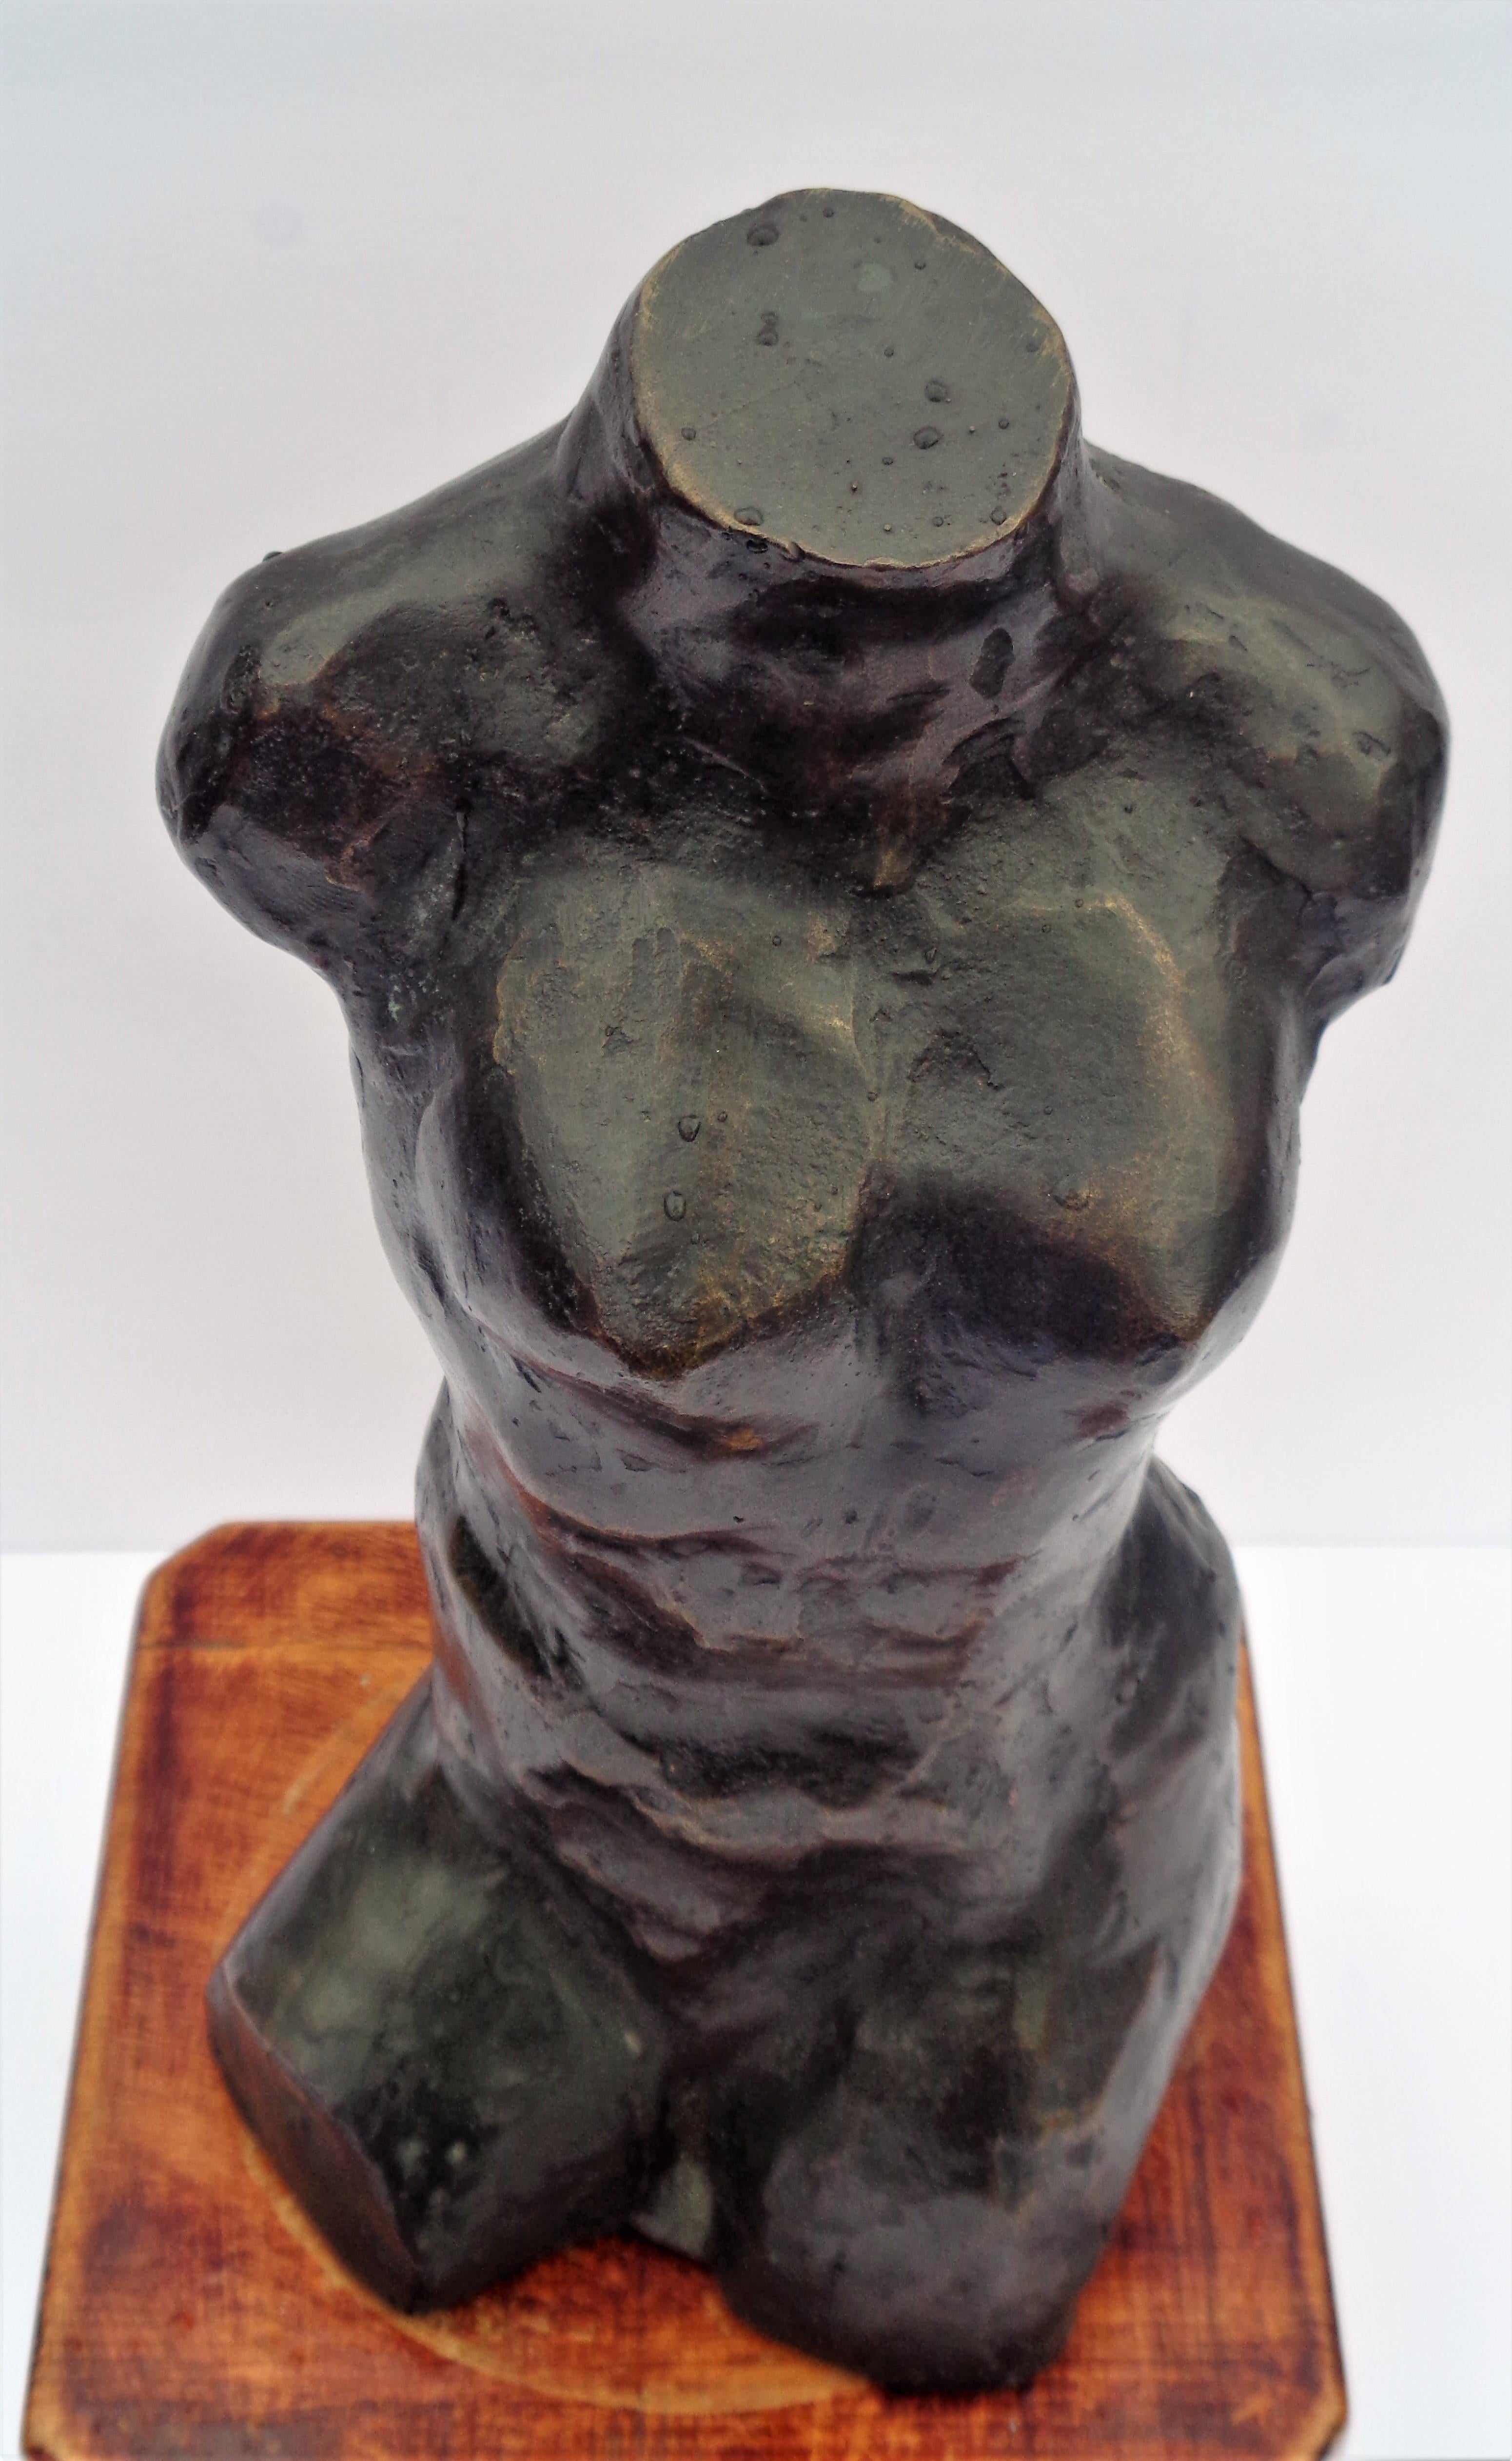 Bronze nude female torso sculpture on wood stand by .Mordechai Avniel (1900-1989) Israeli painter and sculptor. His works are in numerous museum collections in Israel and abroad, including the Metropolitan Museum in NYC and the Carnegie Institute in